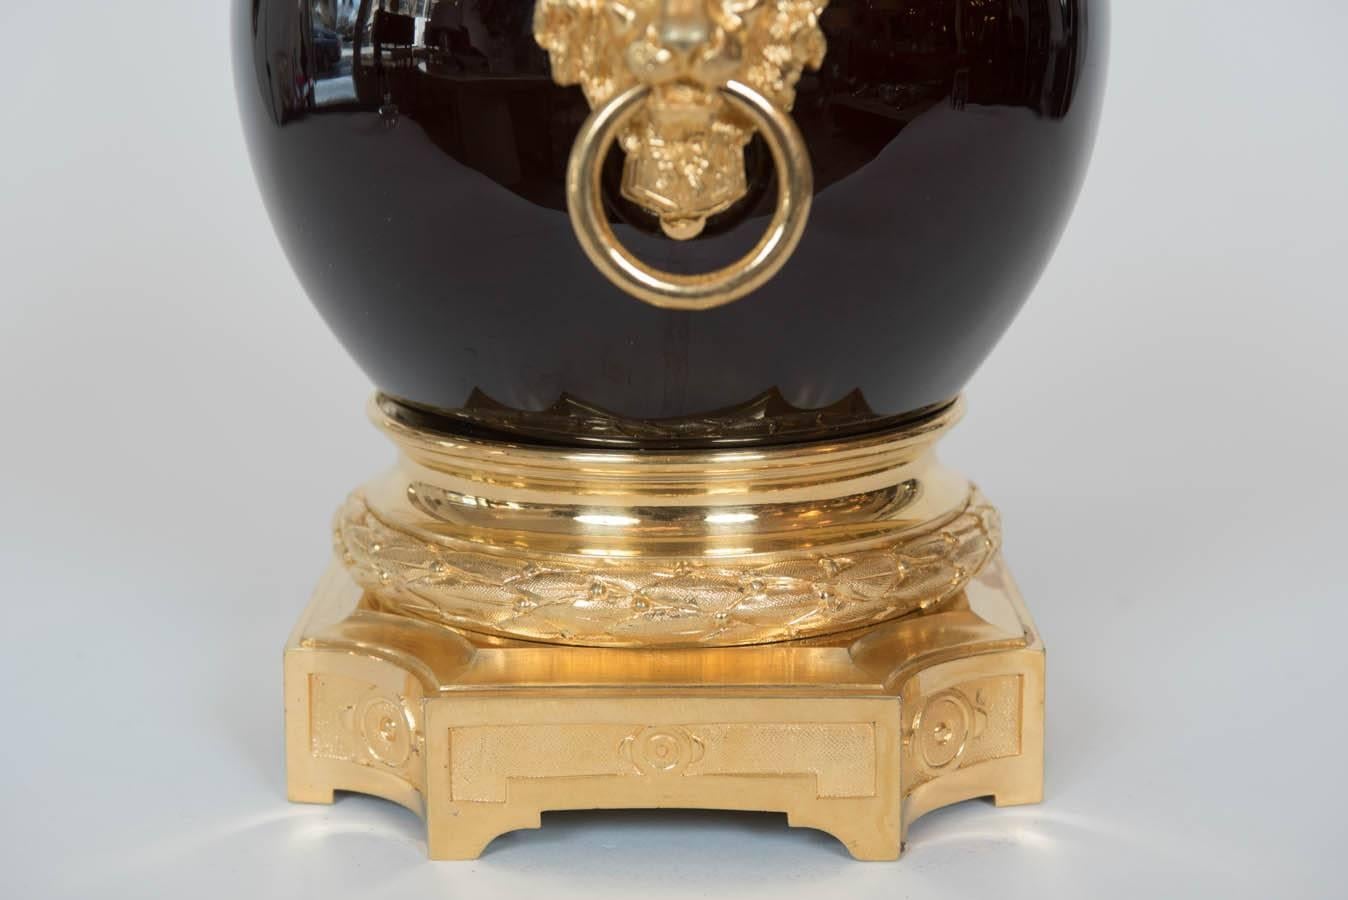 Pair of Chinese Oxblood Lamps with French Ormolu by Gagneau of France 1